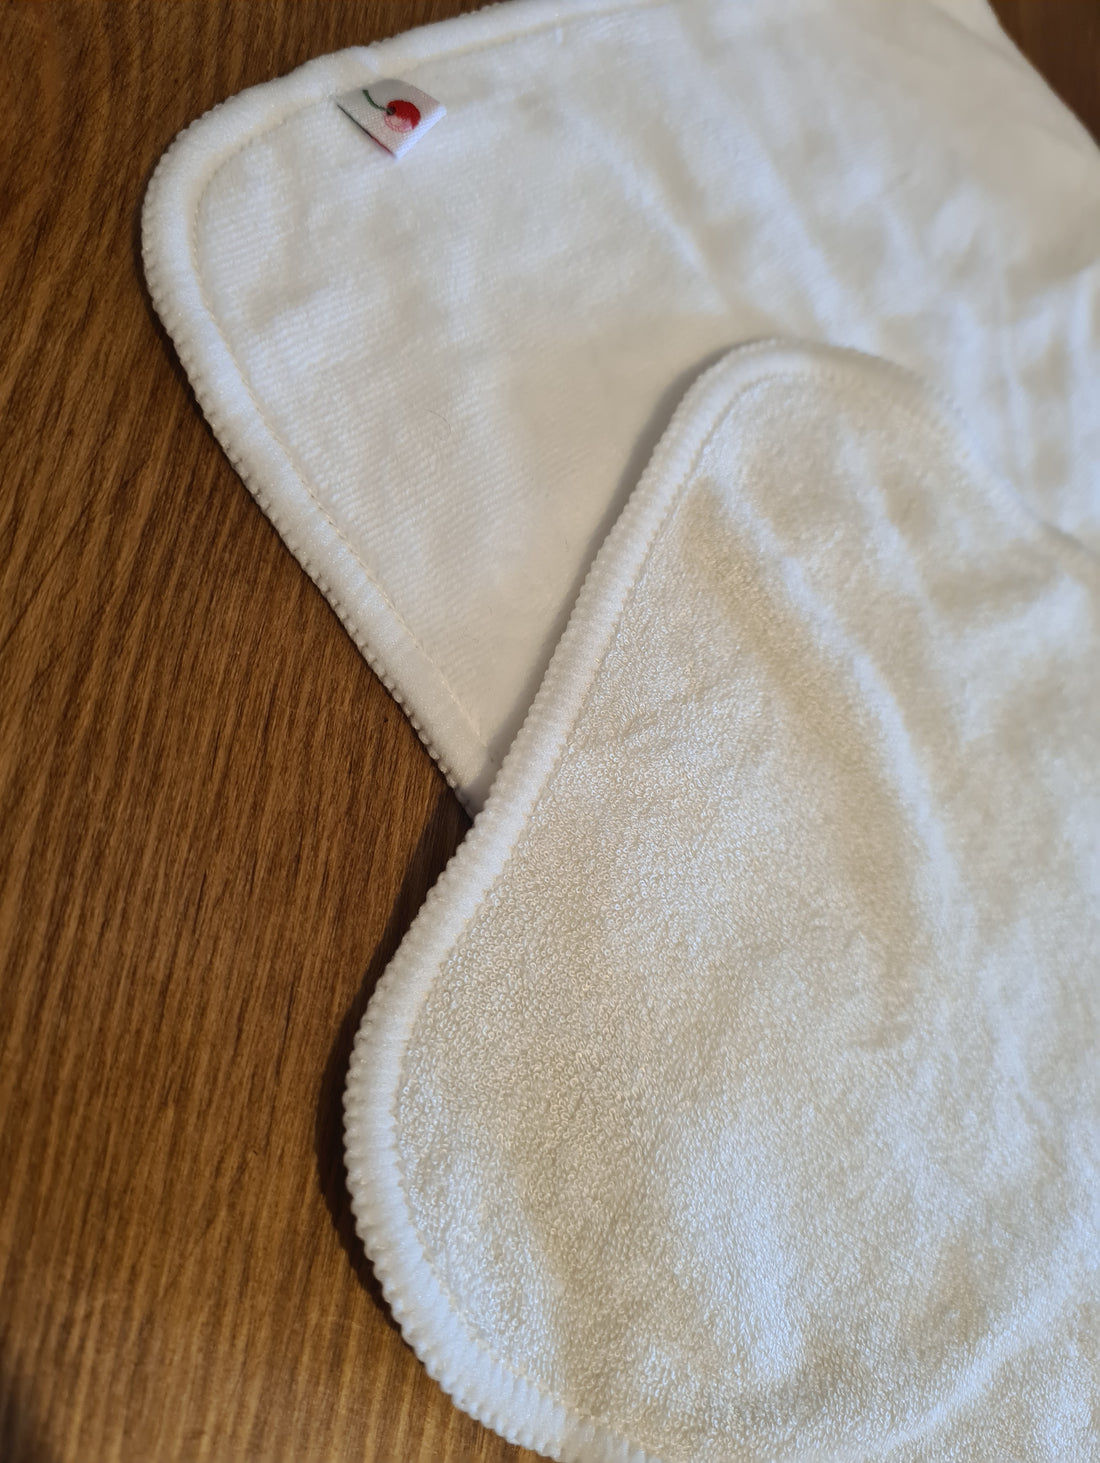 Why switch to Reusable Baby Wipes?